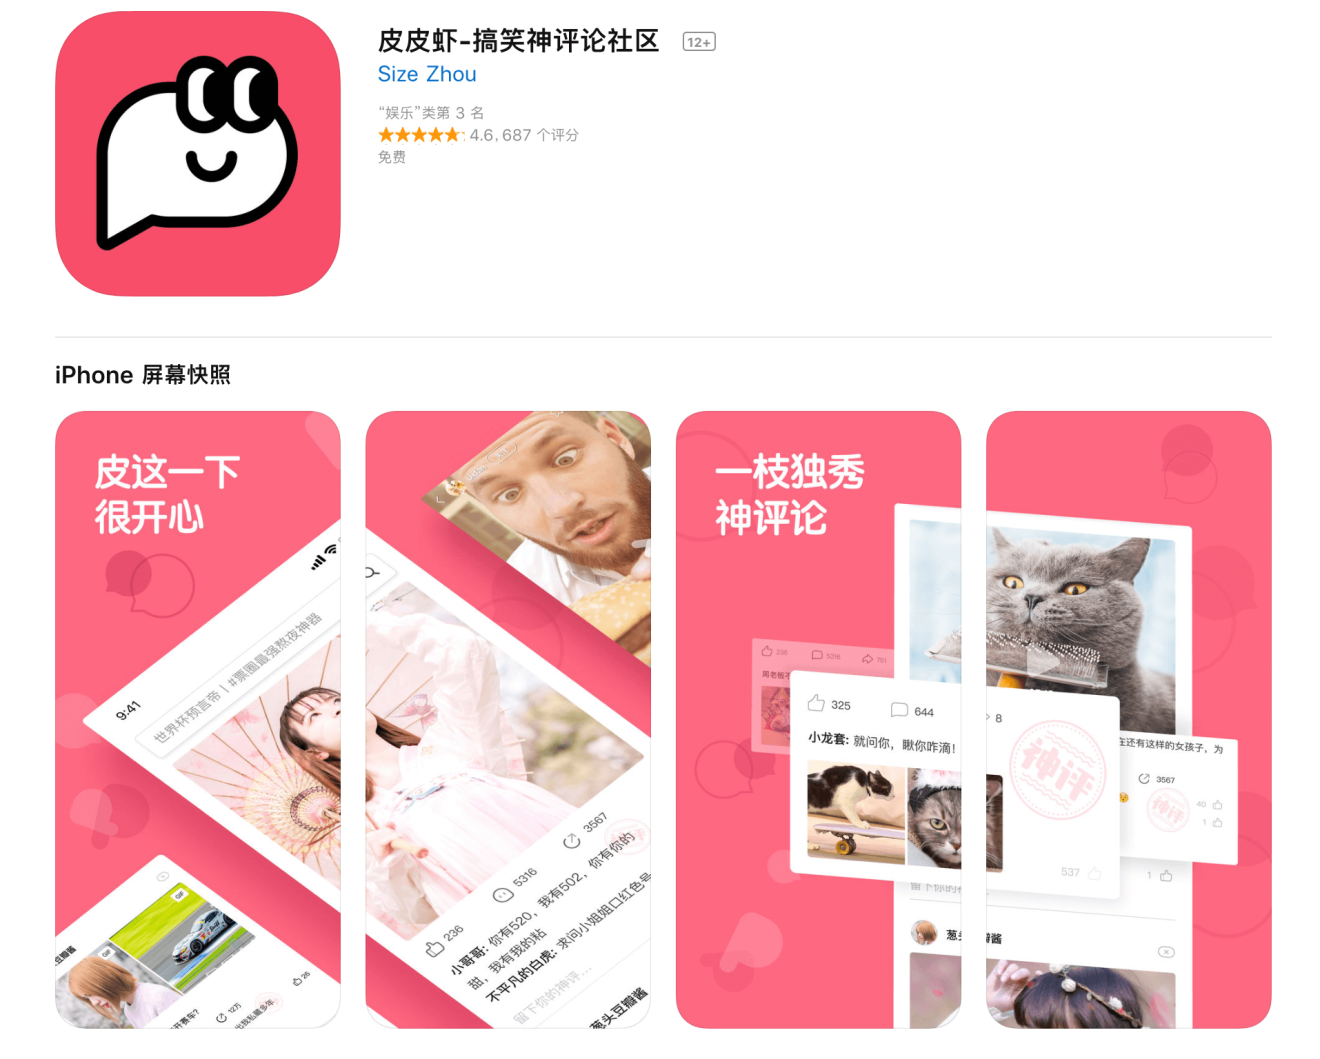 According to App Annie, Pipi Xia was the 9th most popular free iOS app in China on August 5. (Picture: Pipi Xia/App Store)  